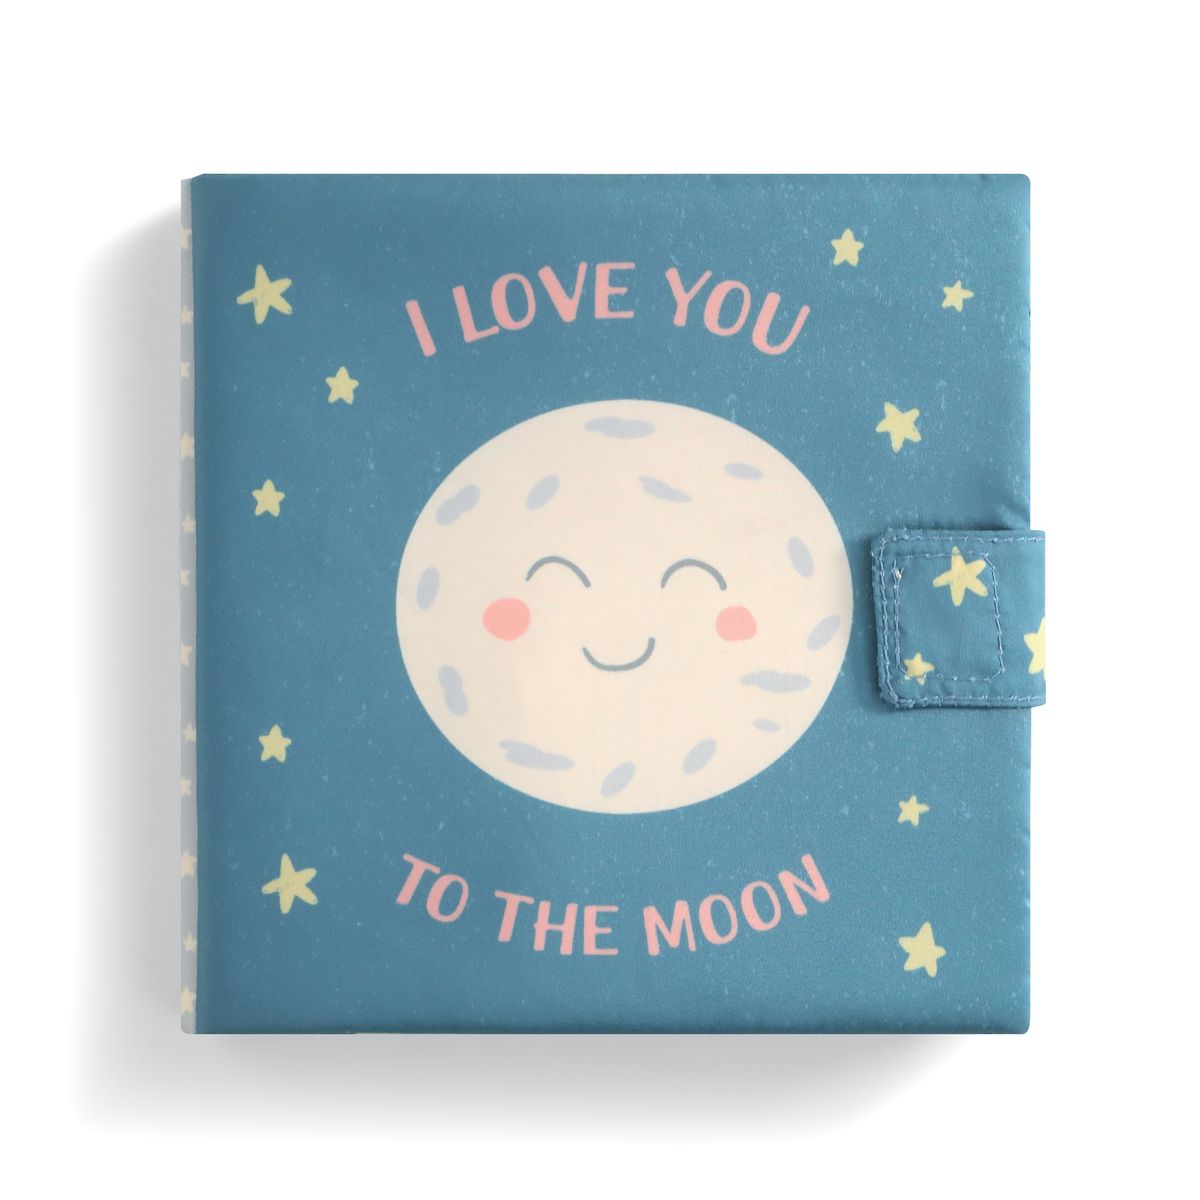 To the Moon Soft Book